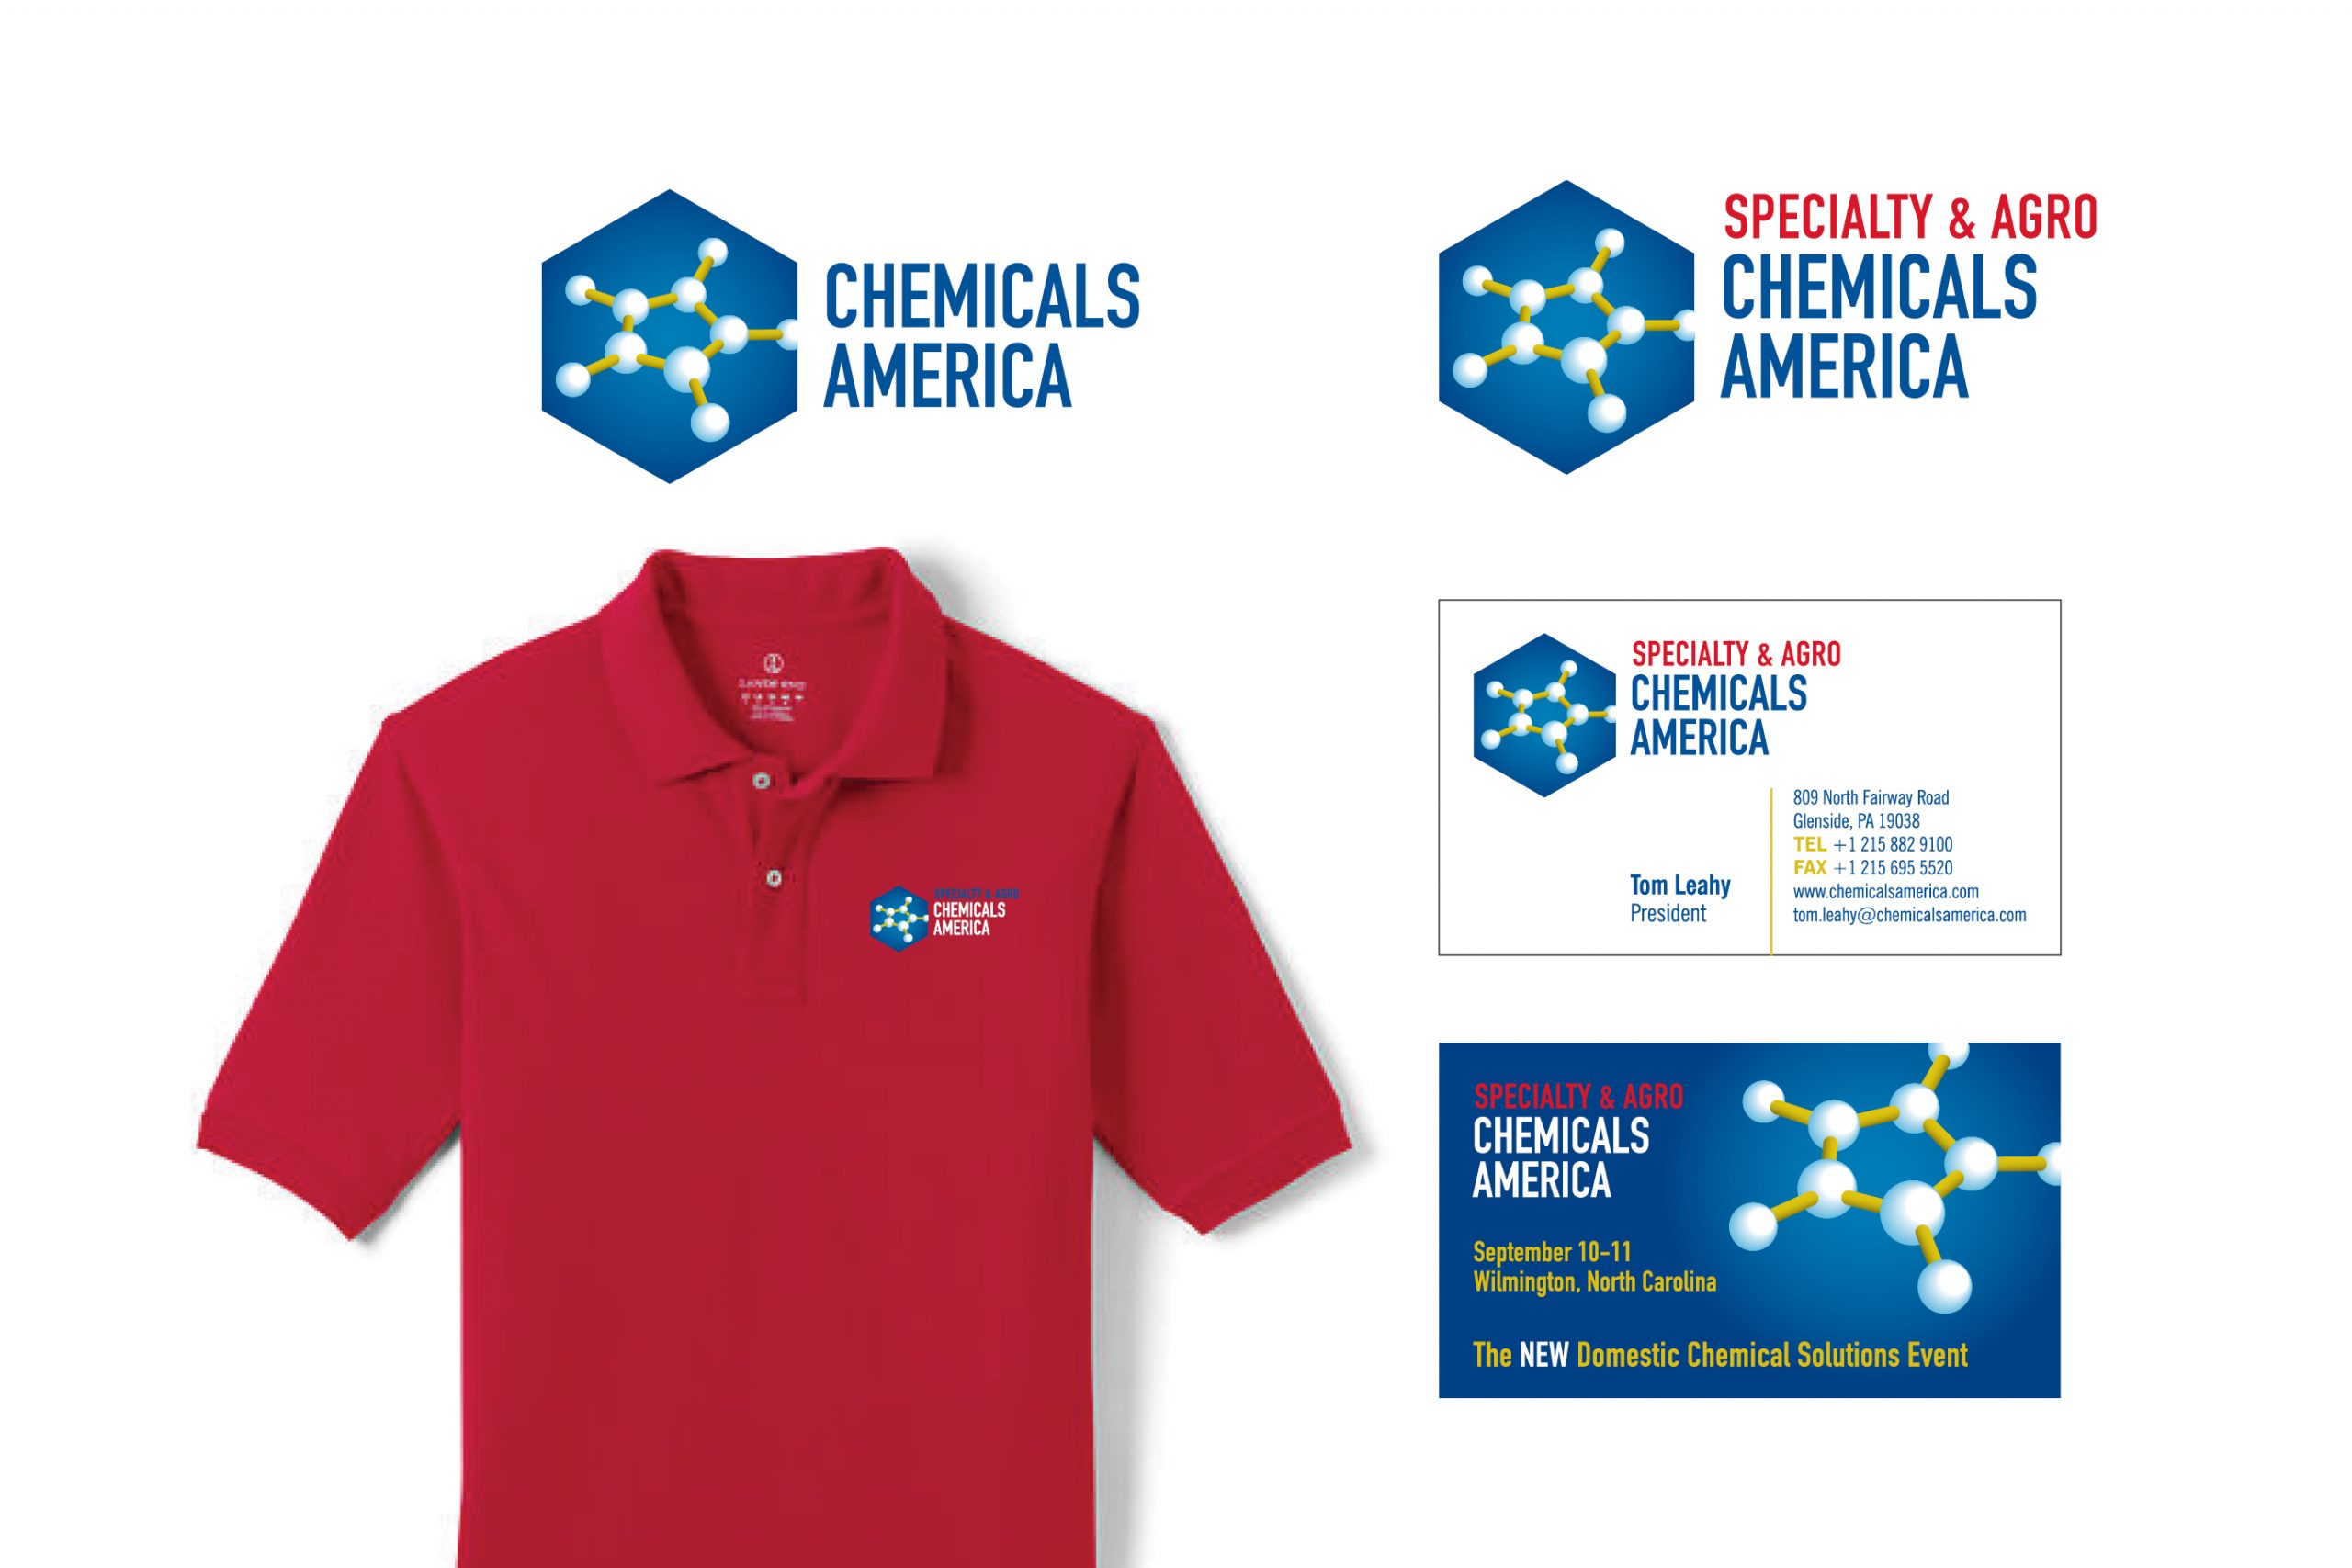 Chemicals America stationary and shirt